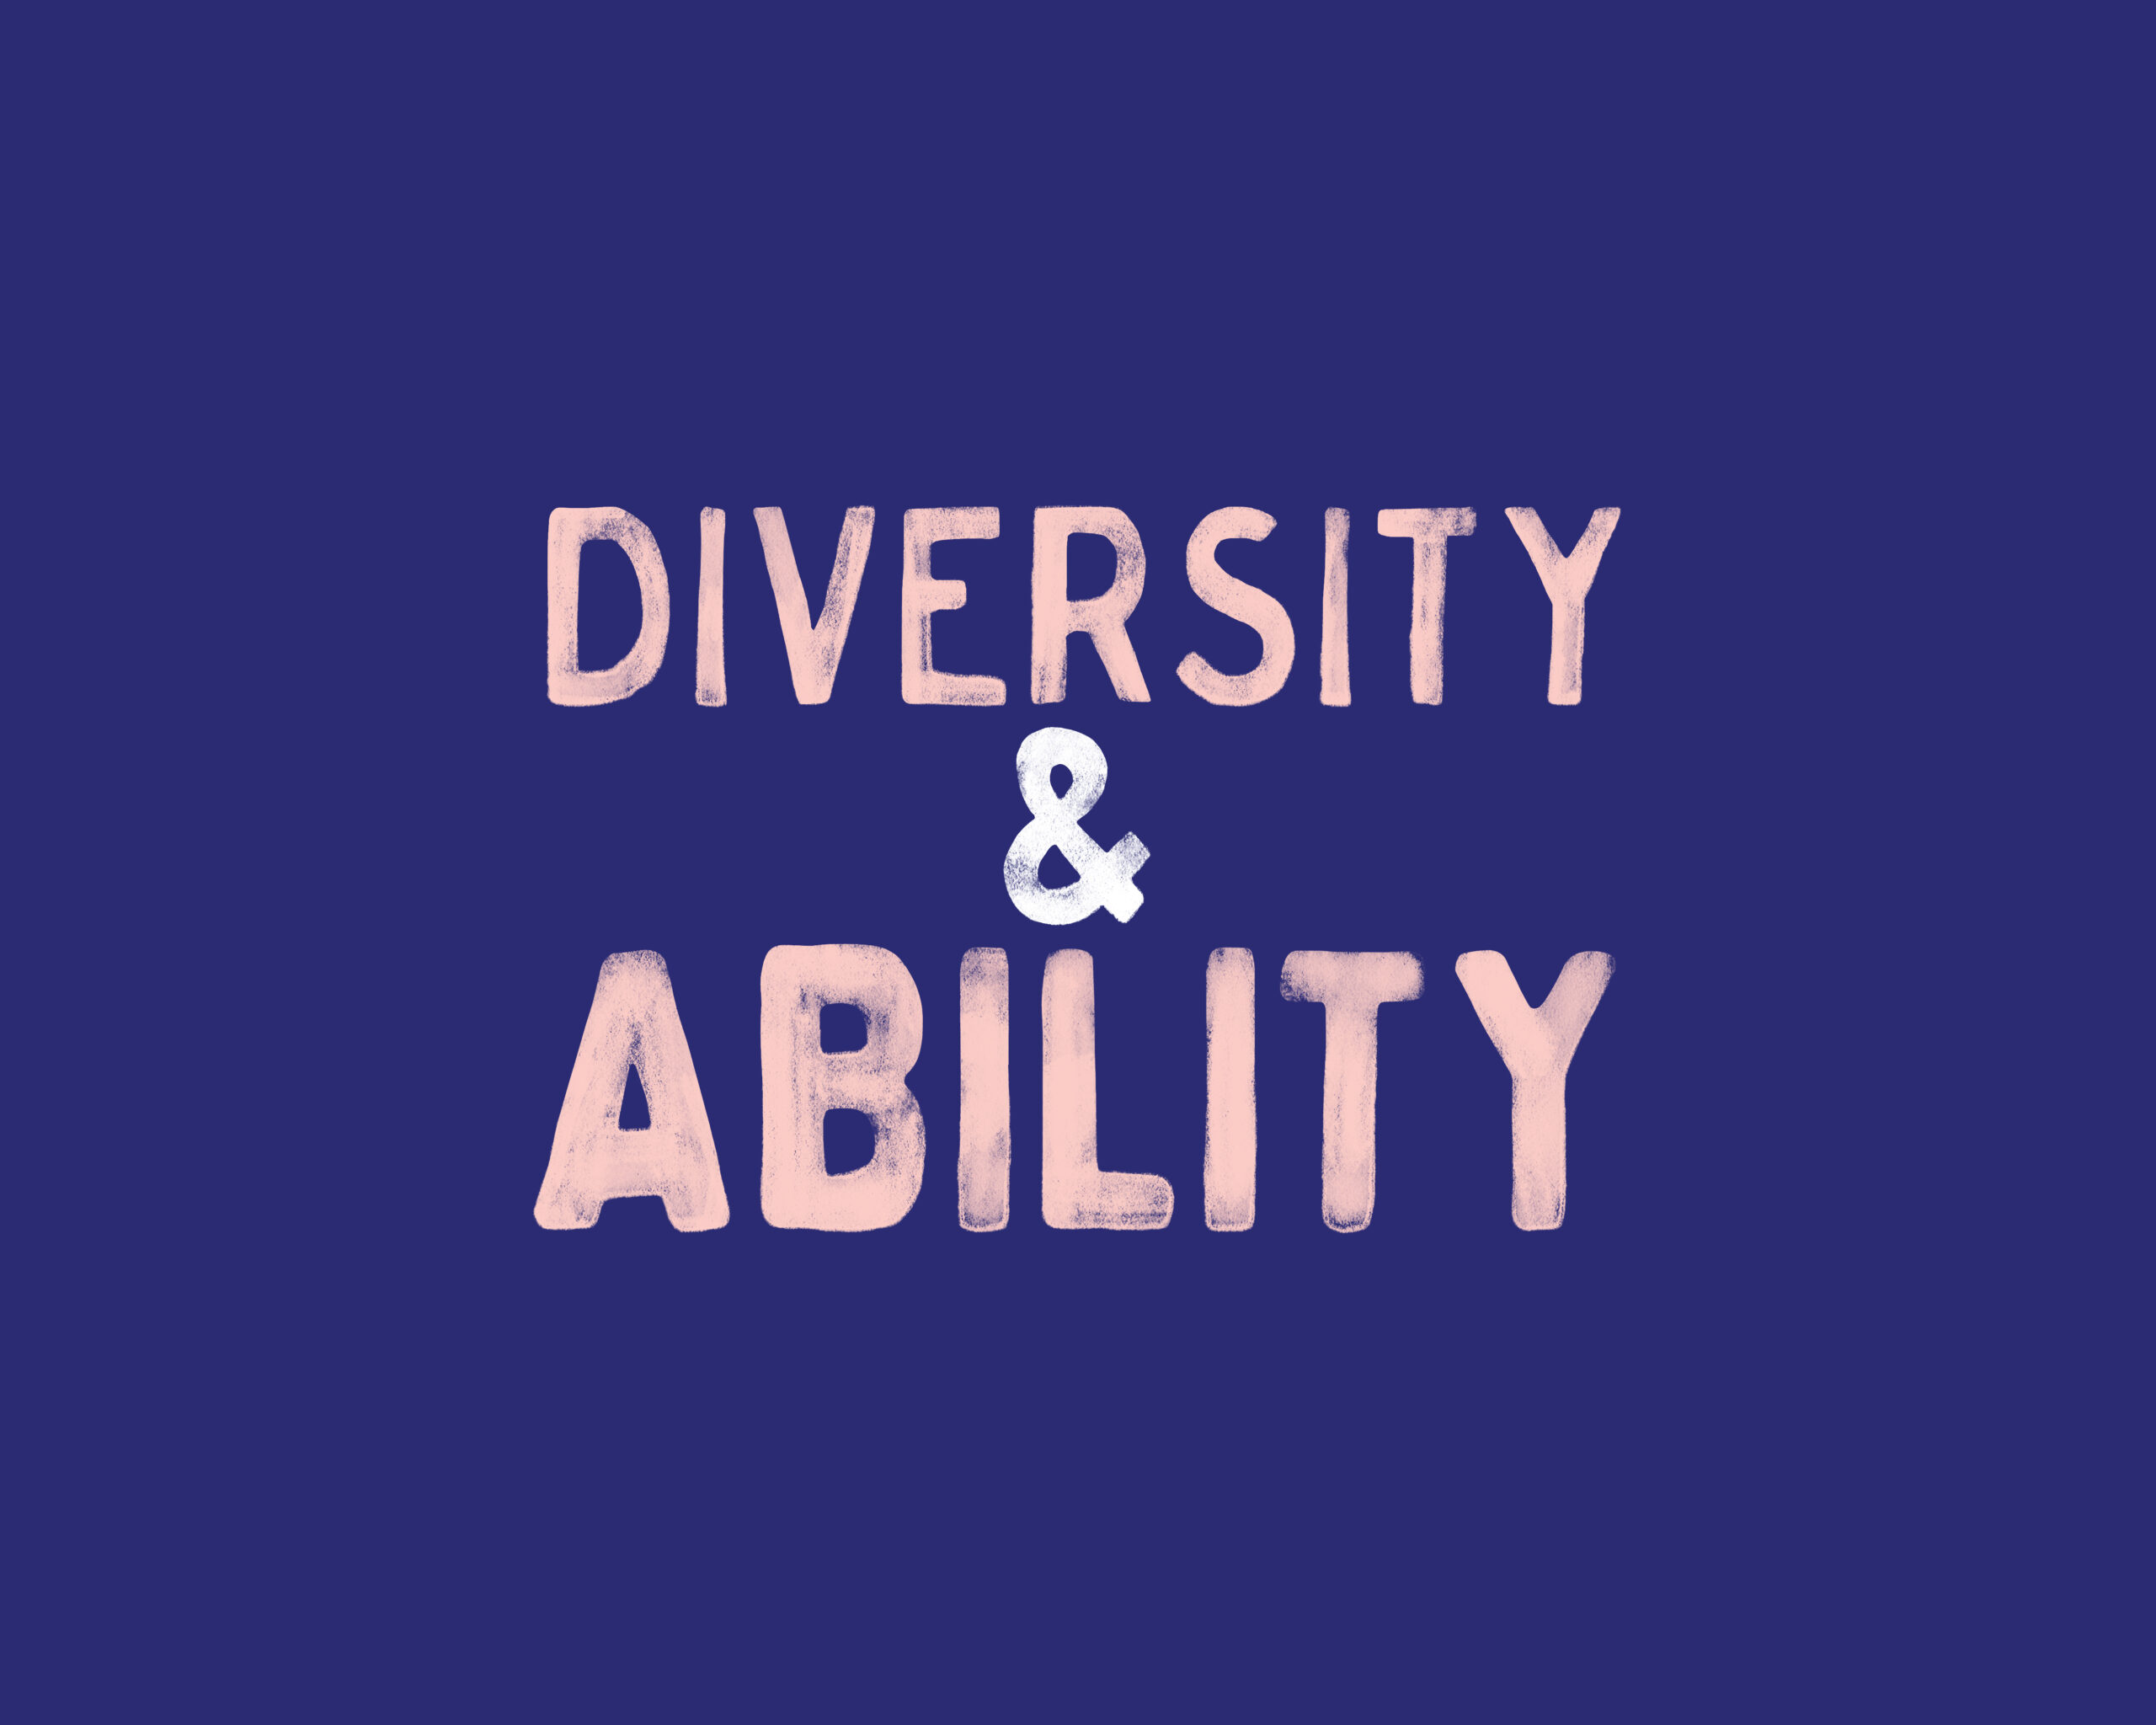 The words "Diversity and Ability" are written in pink, capitalised text against a blue background.